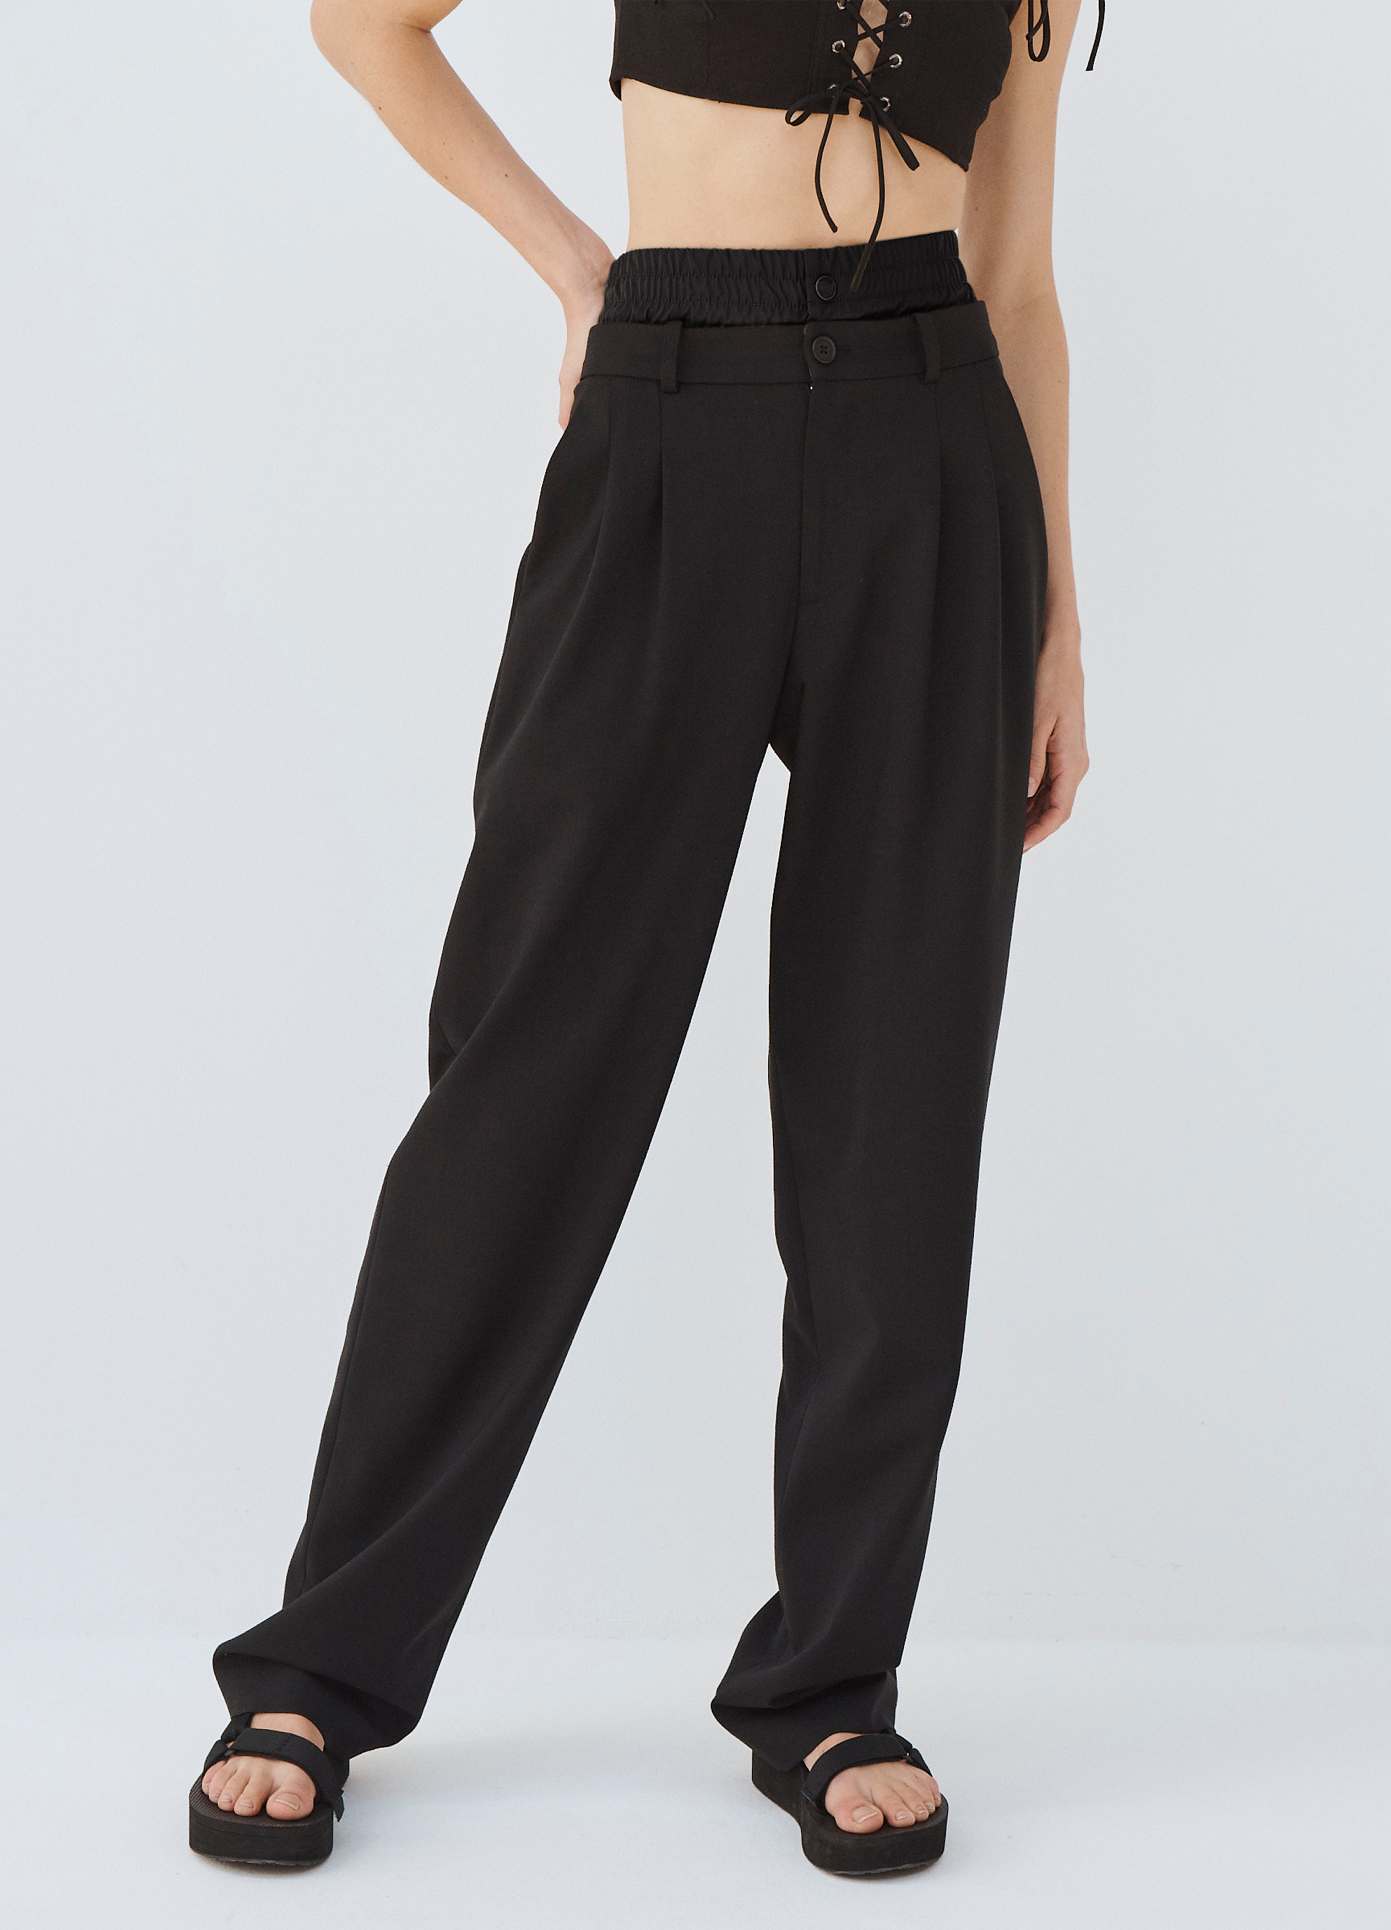 MONSE Double Waistband Trouser in Black on model front detail view